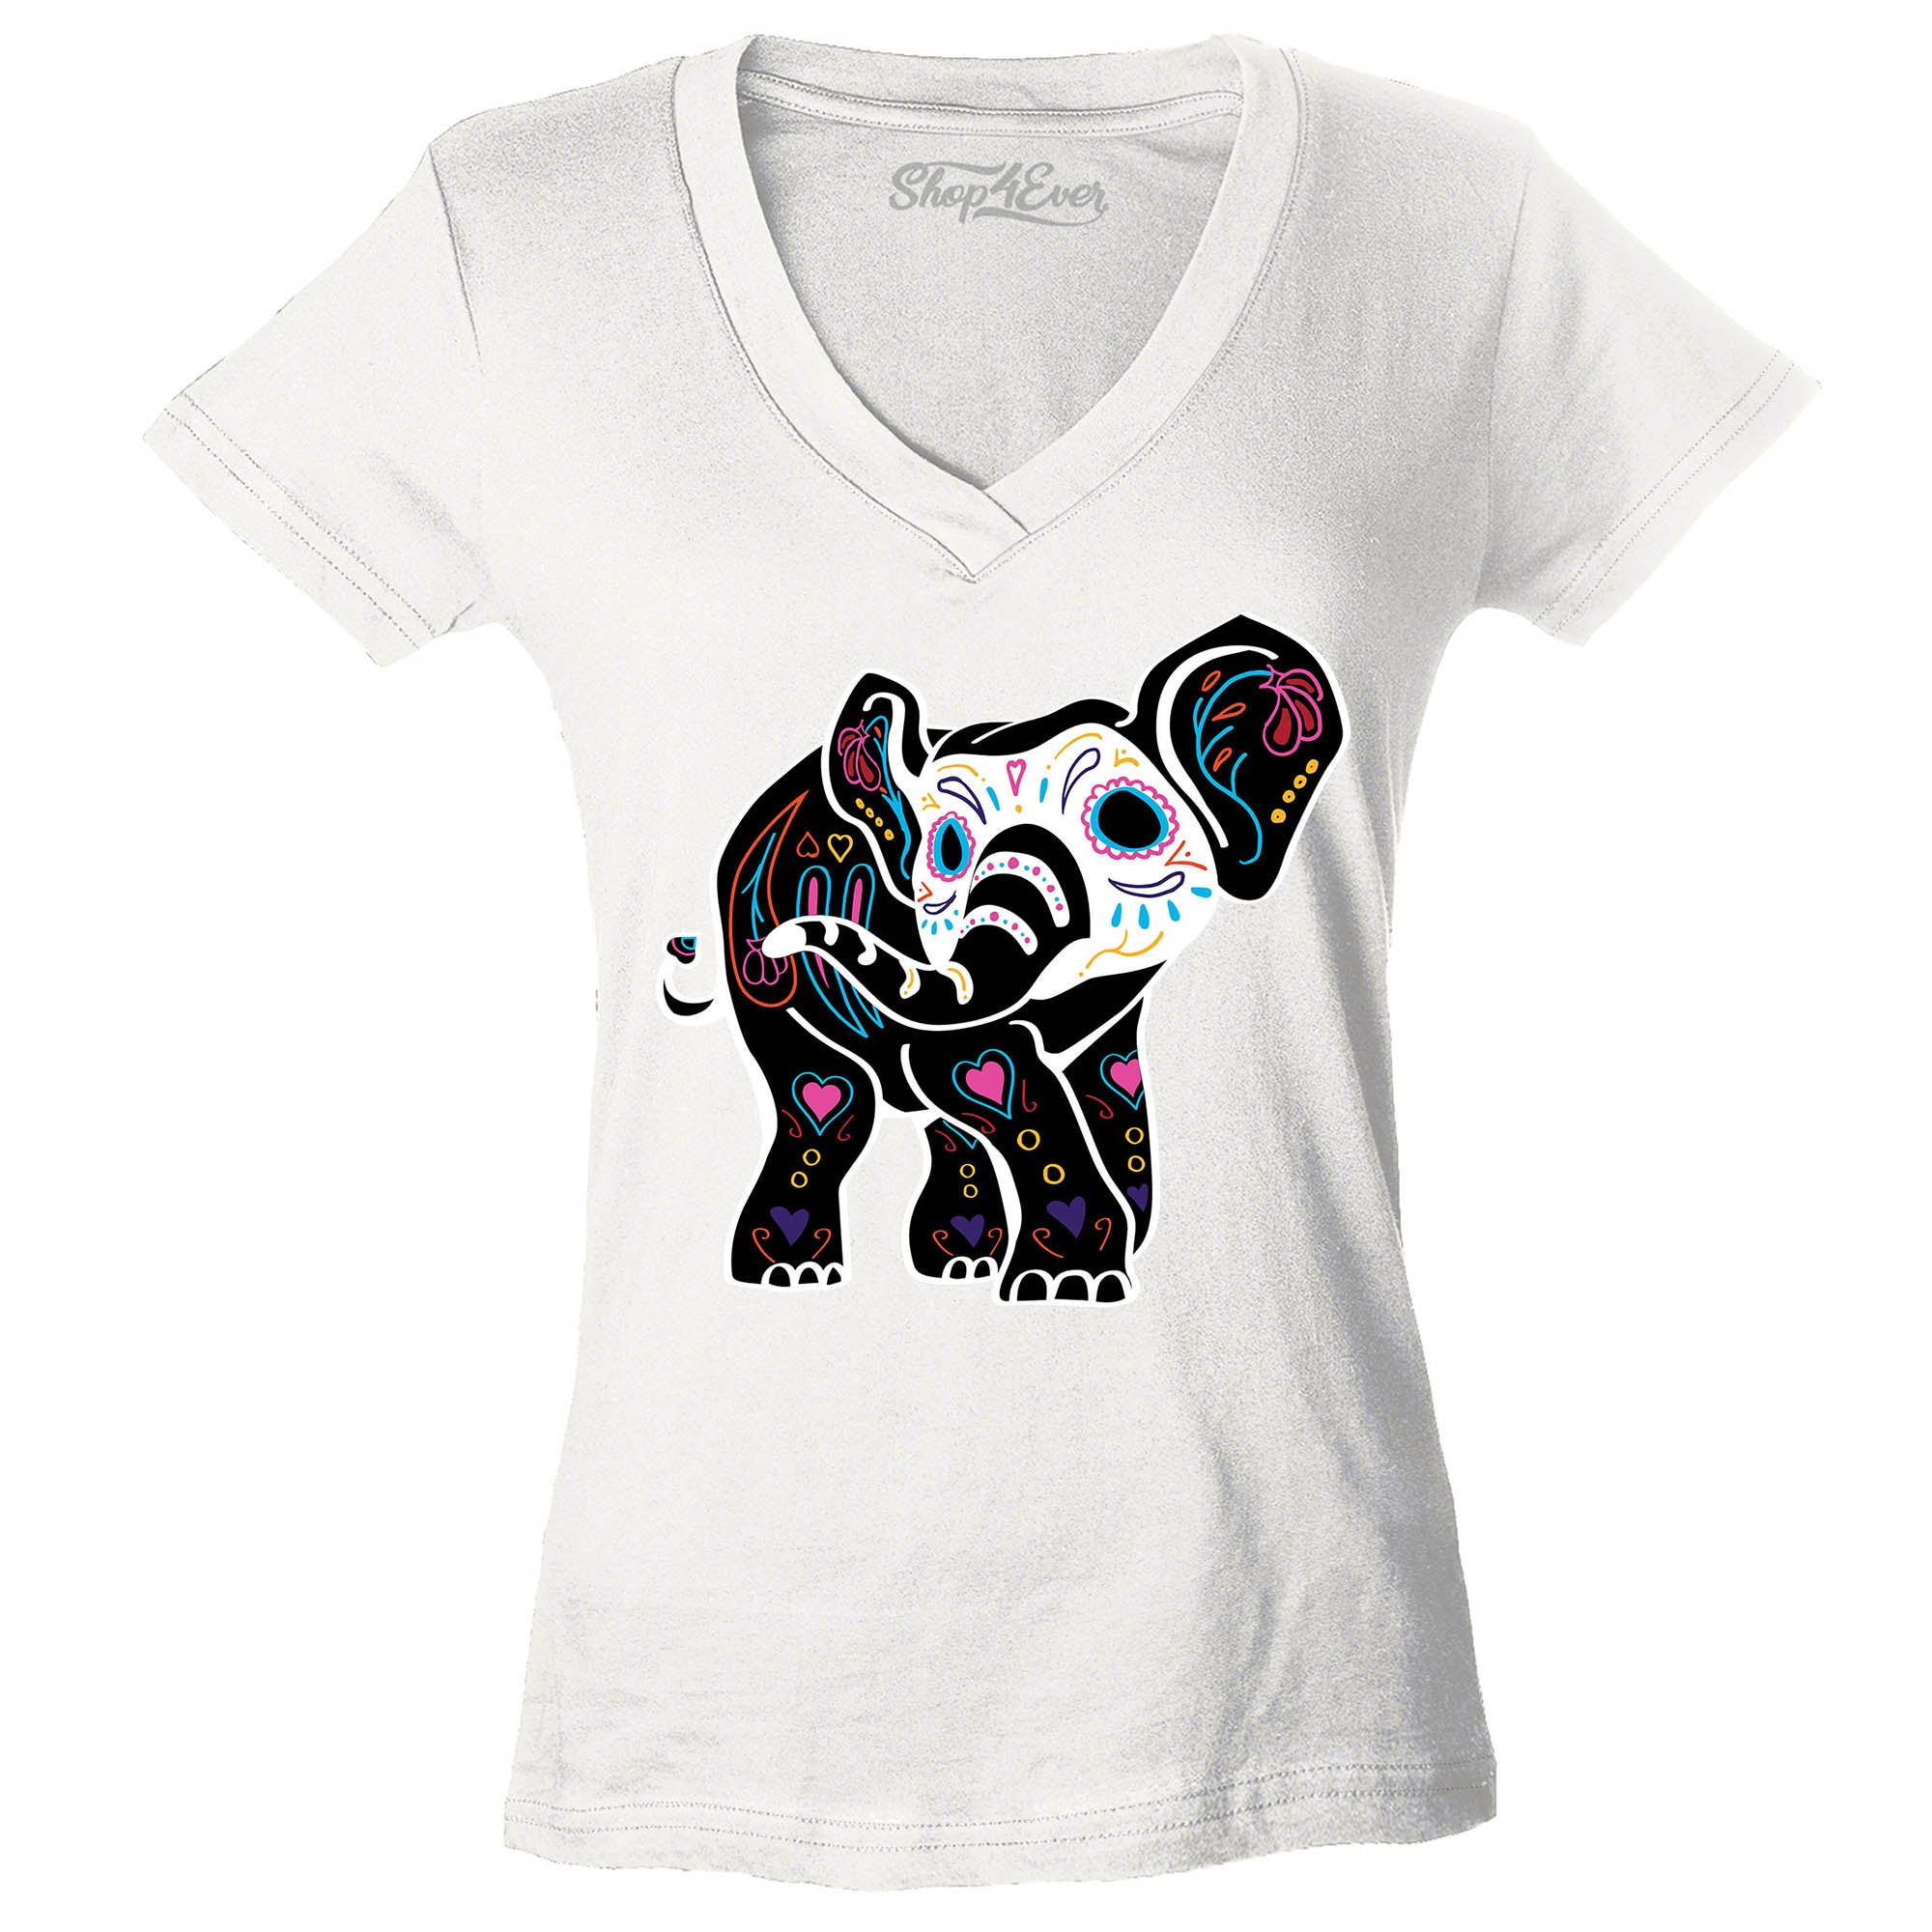 Day of The Dead Sugar Elephant Women's V-Neck T-Shirt Slim Fit